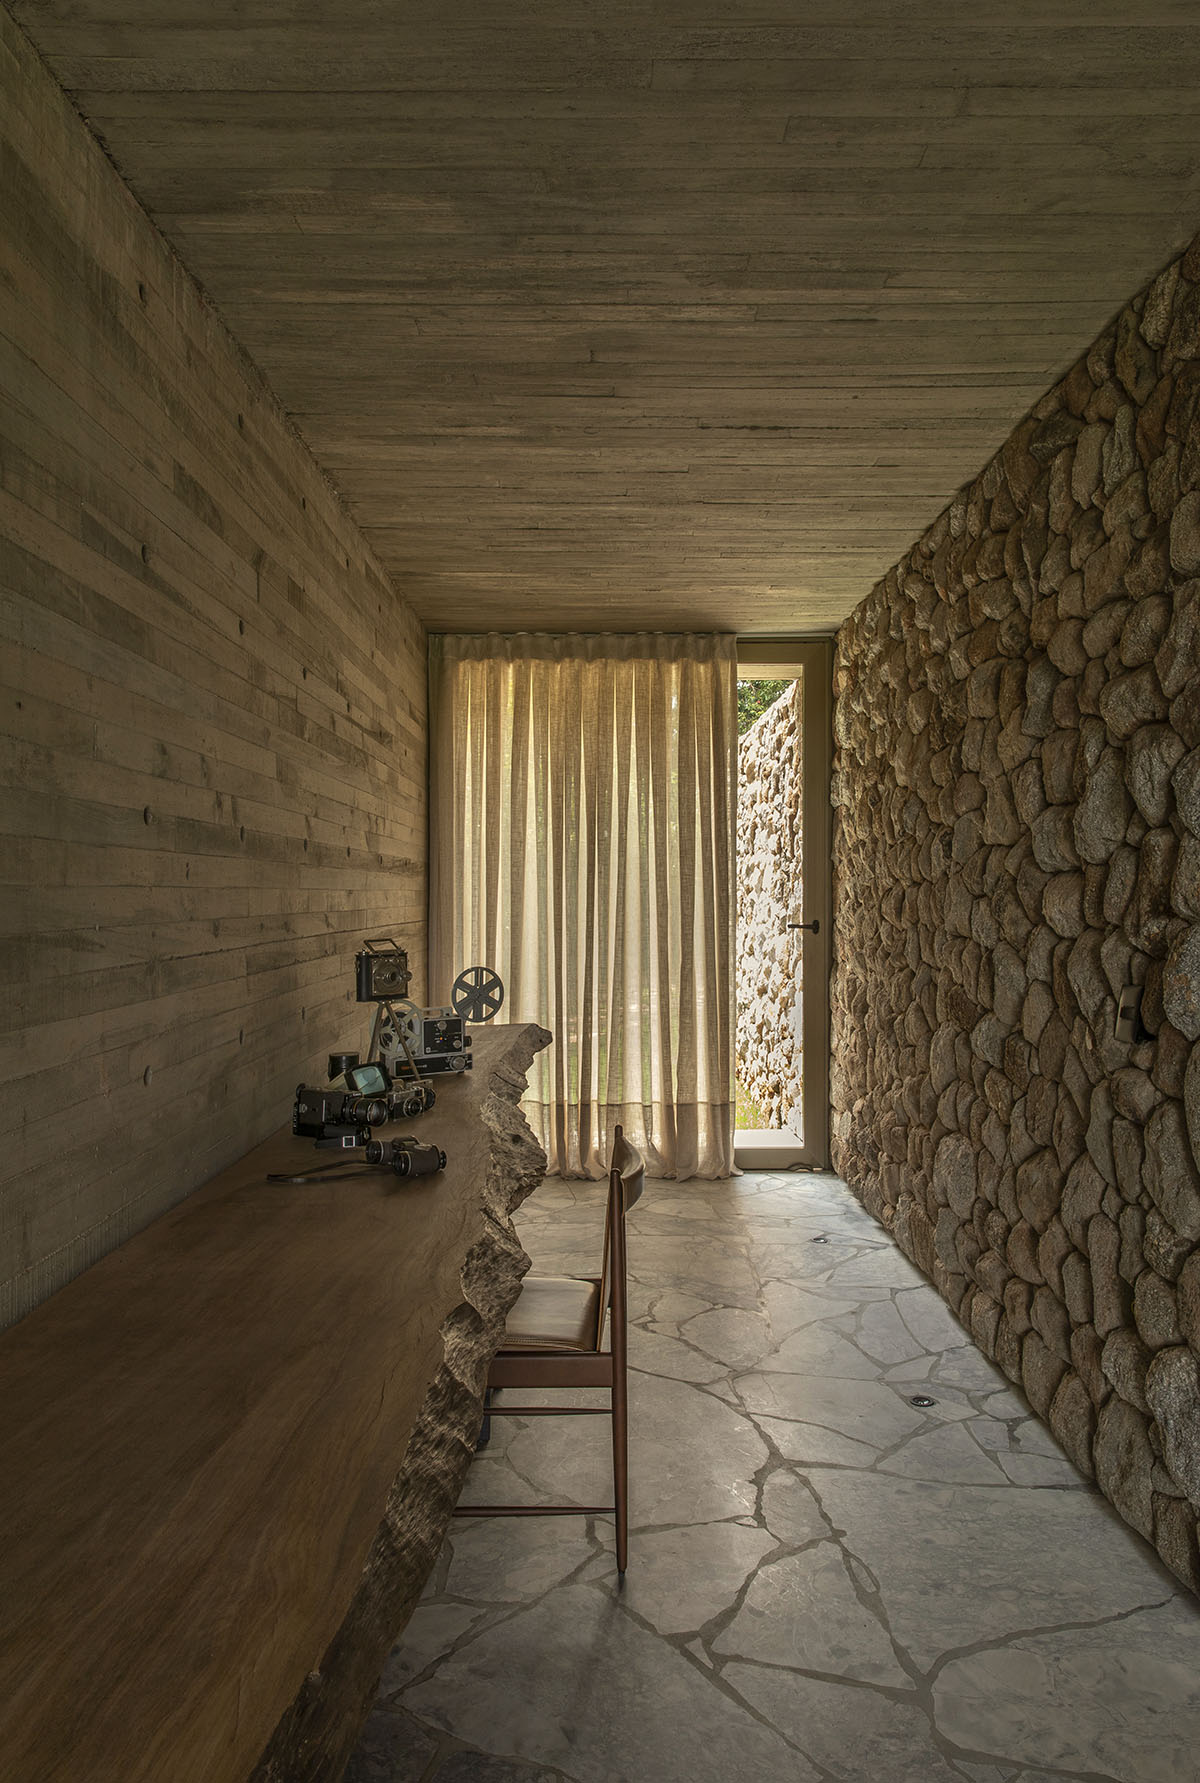 mf+arquitetos brings lightness to stone house with wooden louvres in Brazil 